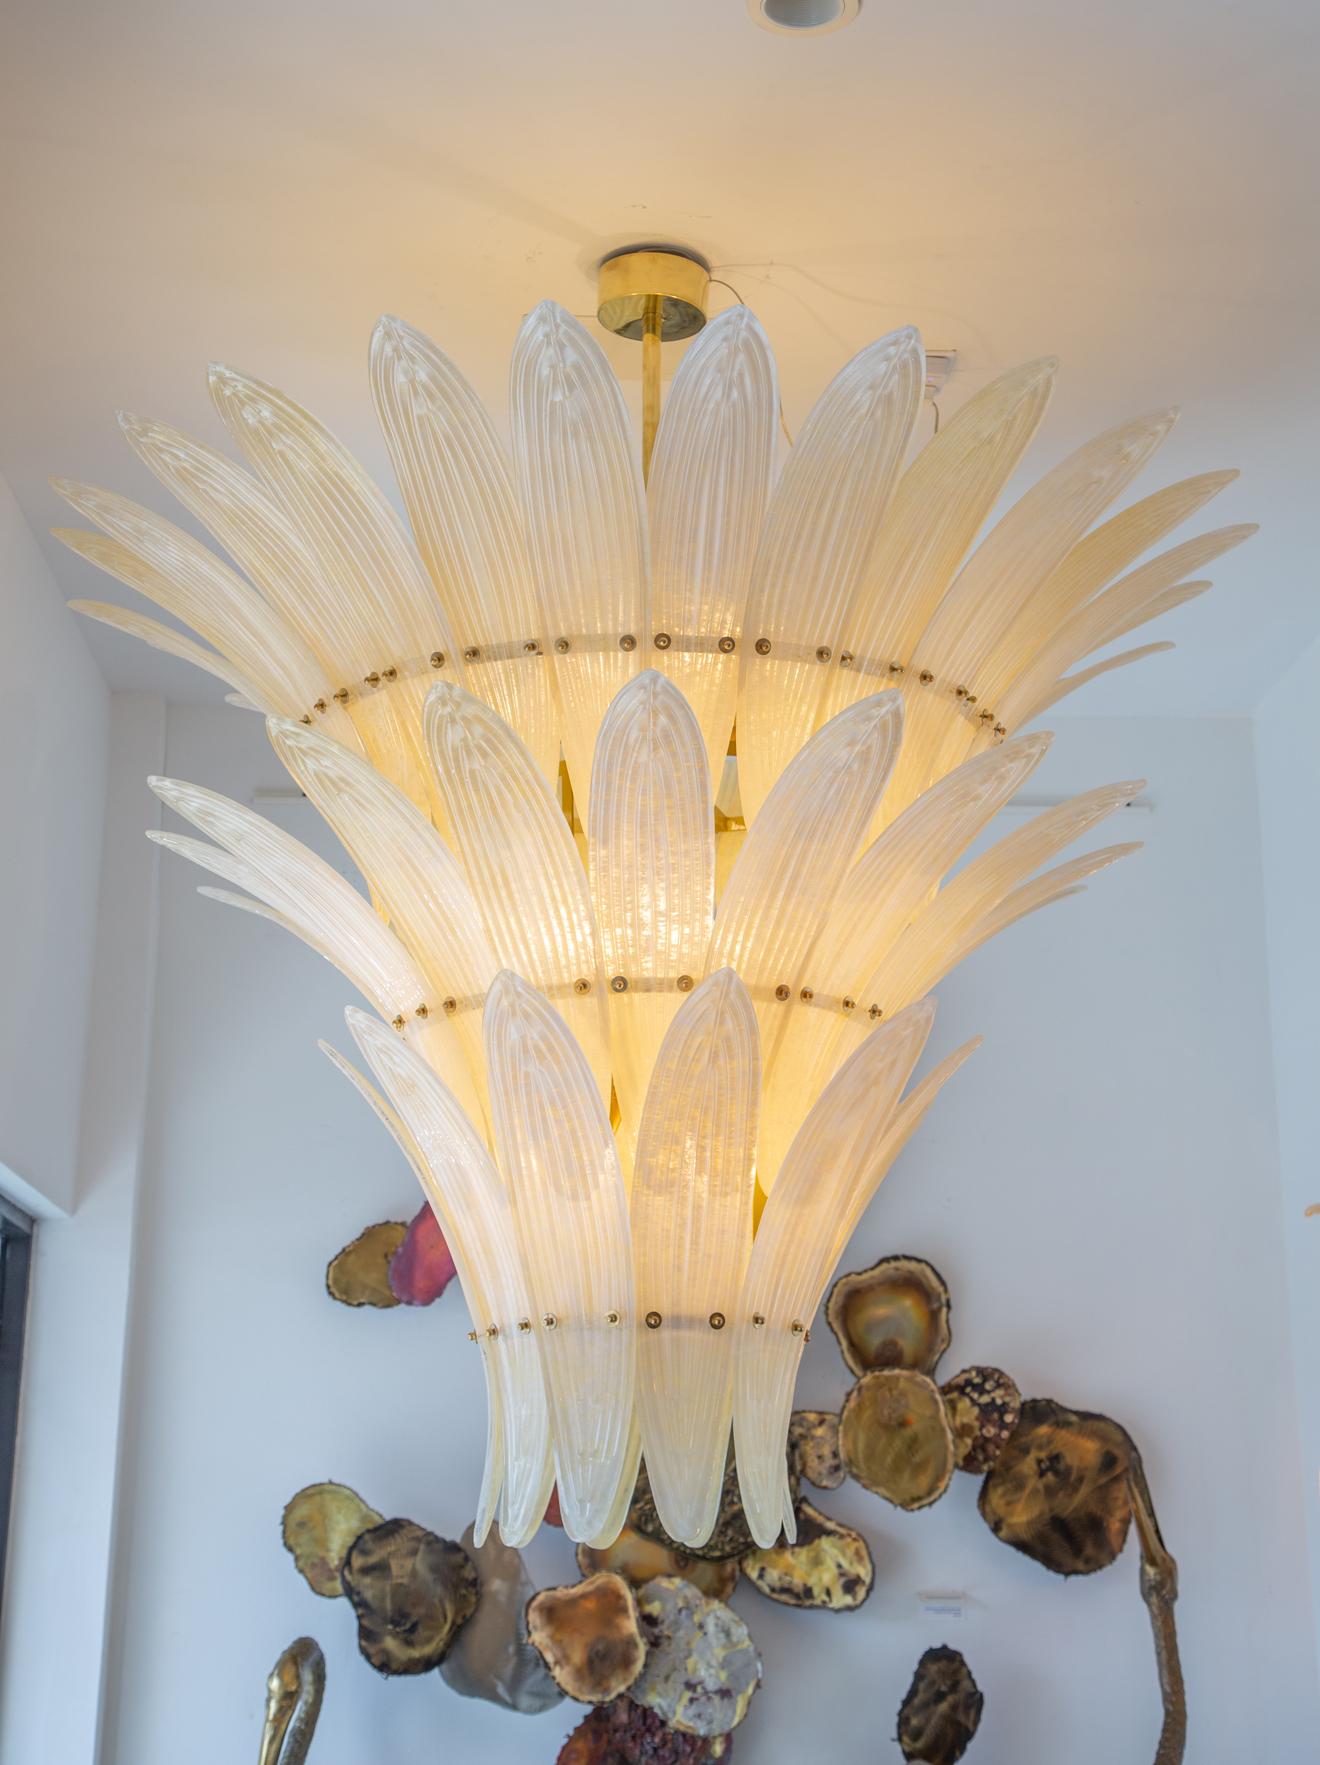 Large palm leaves Murano  glass chandelier, Italy in stock
Composed of 50 of textured Murano glass palm leaves
Champagne color
Brass accent
12 E26 Bulbs, wired to US standart
Drop can be modified to your own specs, stem or chain can be